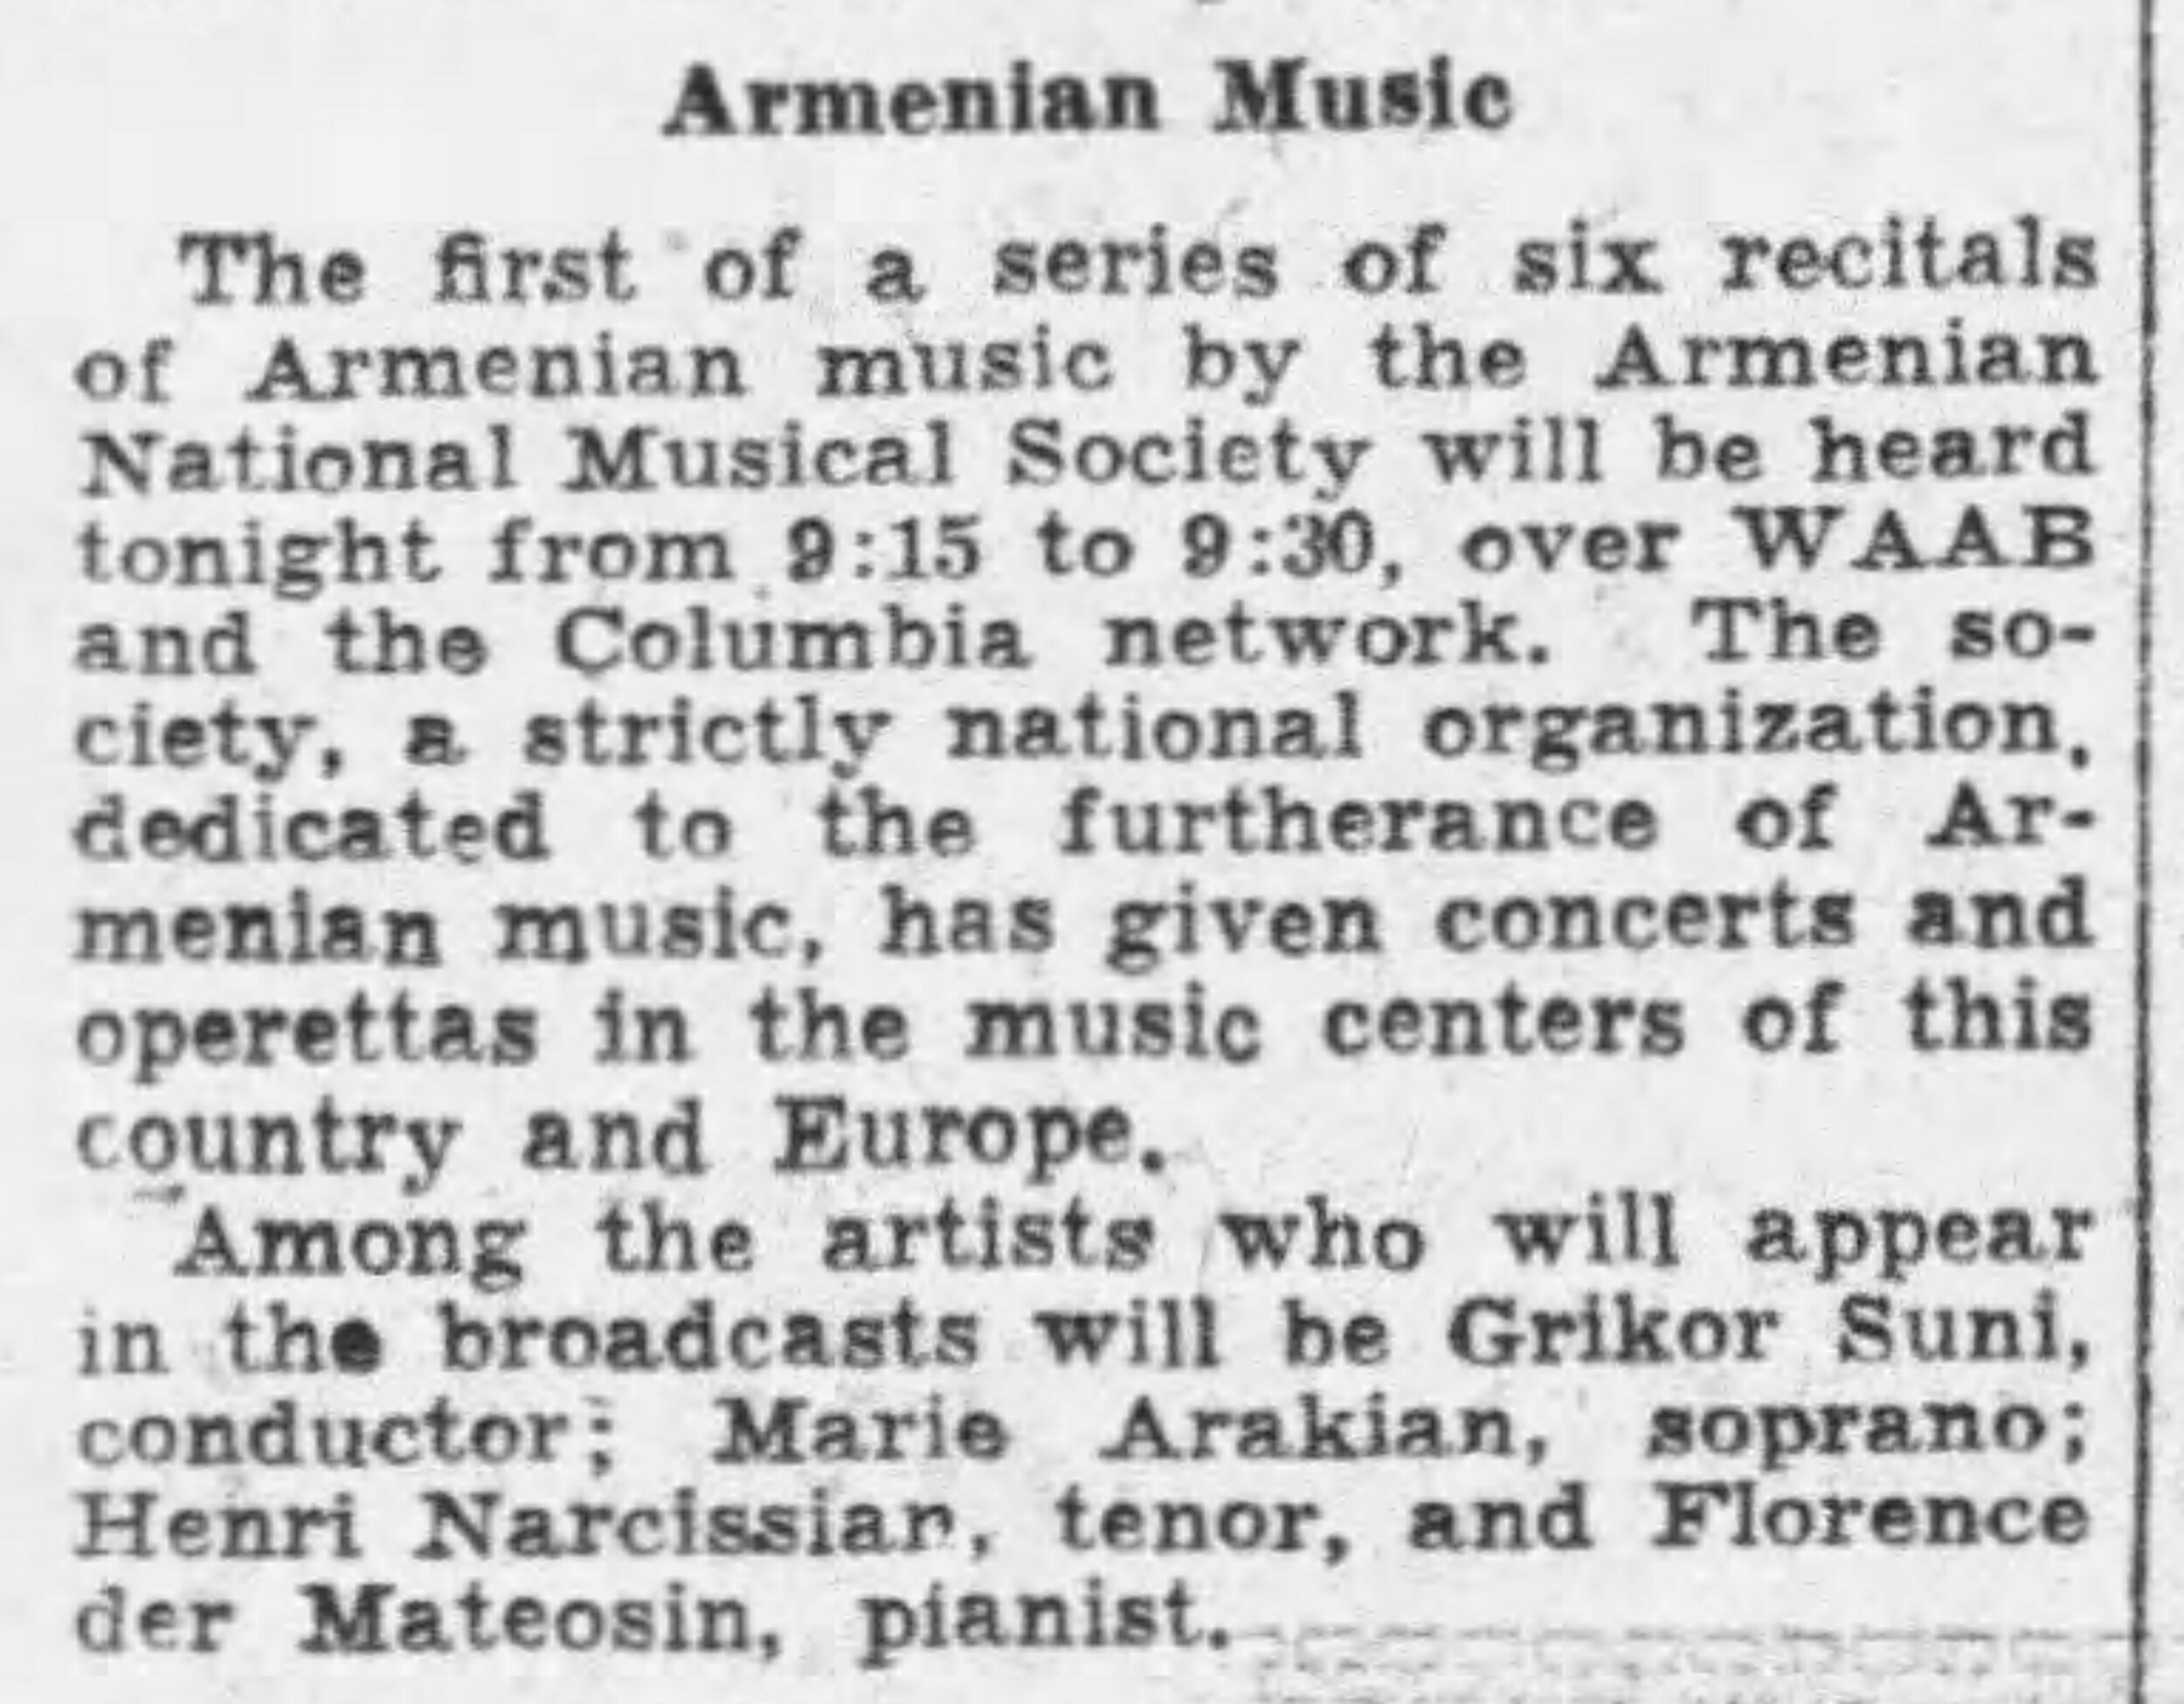  Listing for radio broadcast of program featuring Grikor Suni with Marie Arakian and Henri Narcissian in the May 28, 1932 issue of the Boston Globe (Image:  newspapers.com ) 